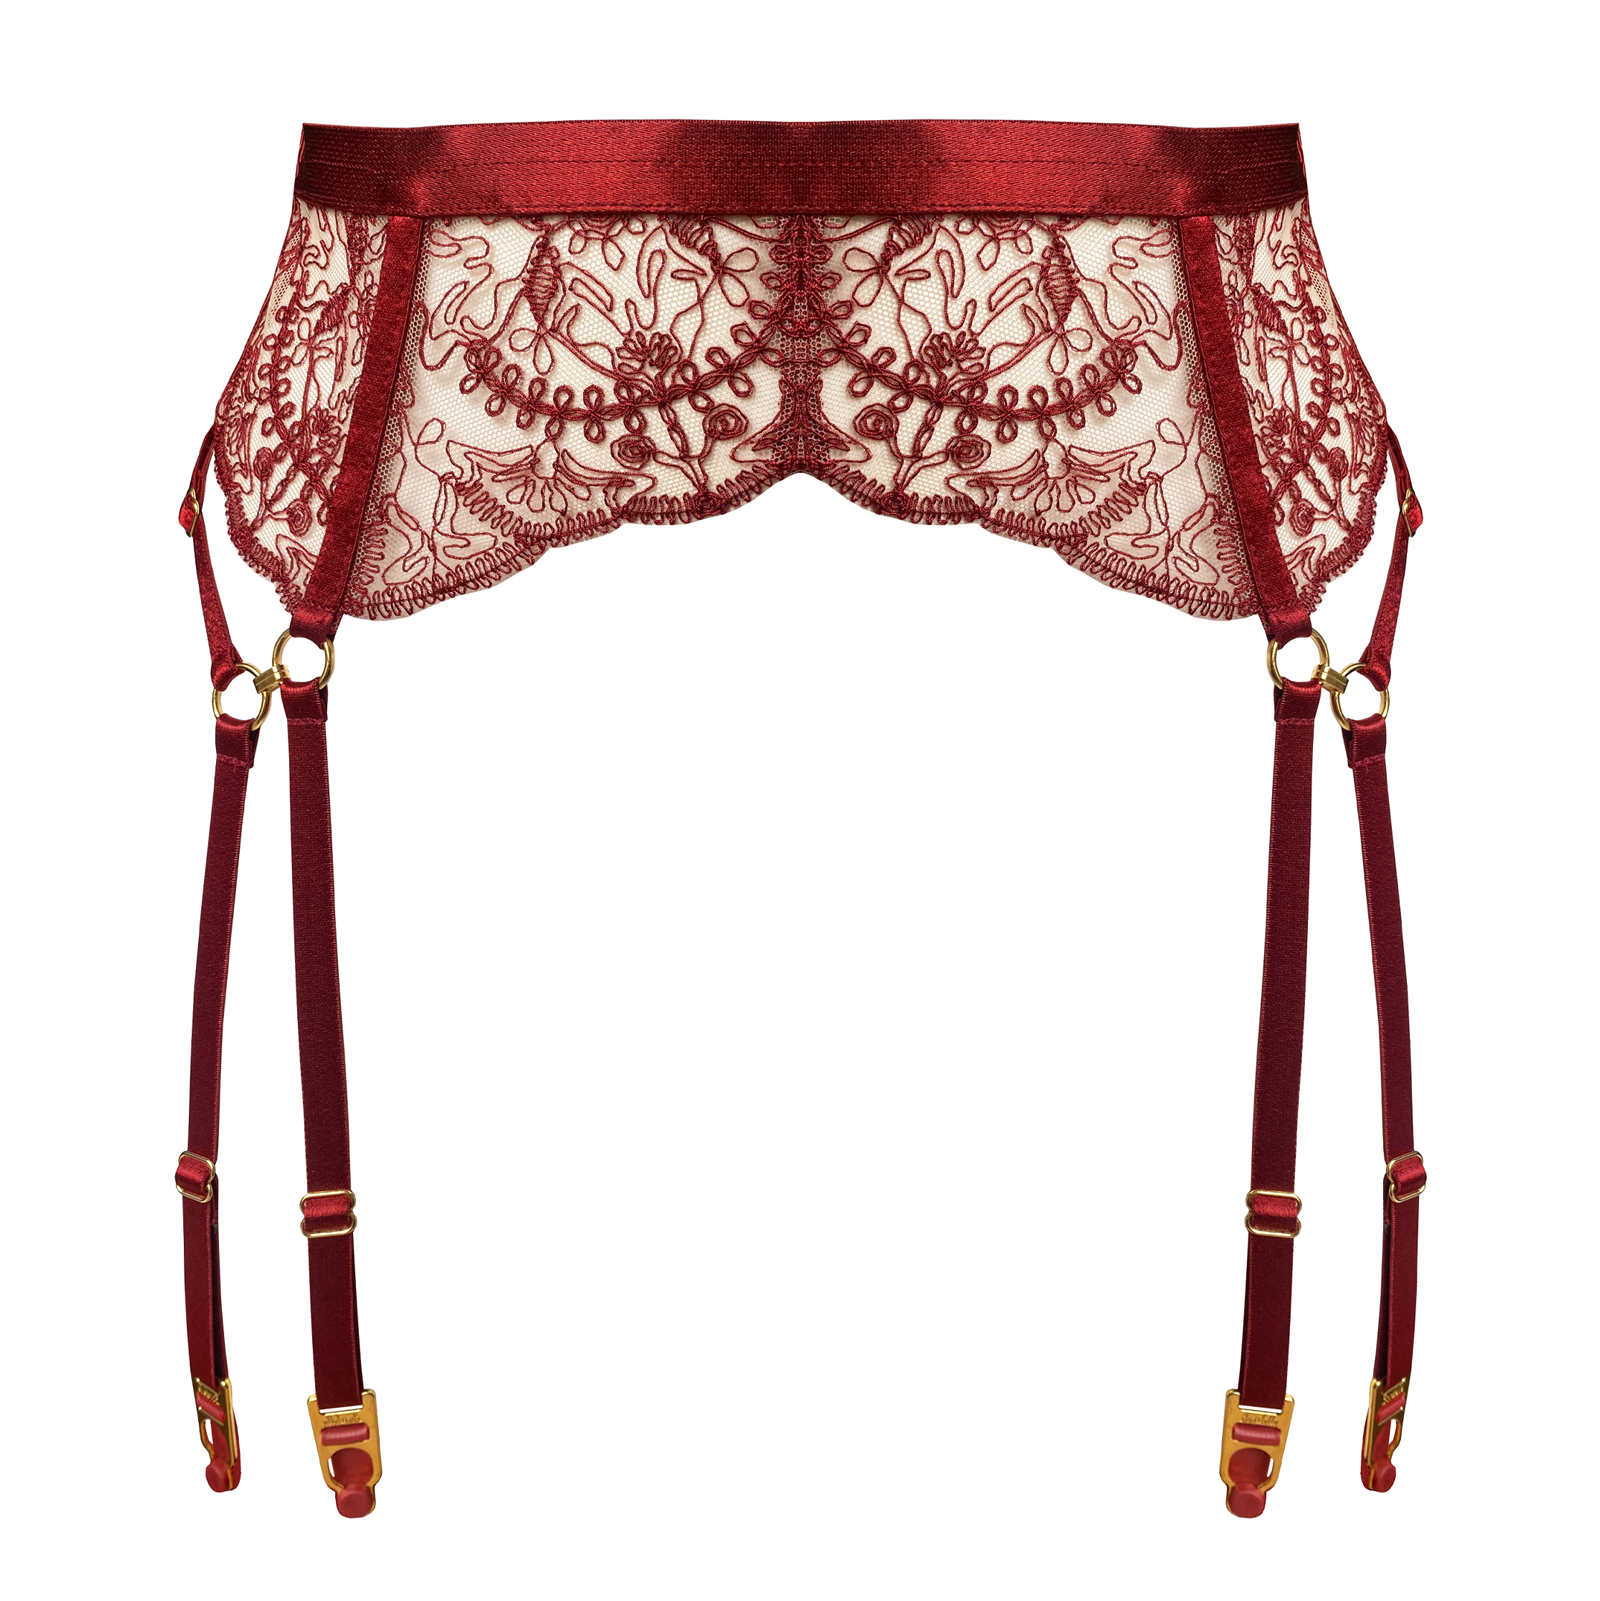 Cymatic suspender by Bordelle - red